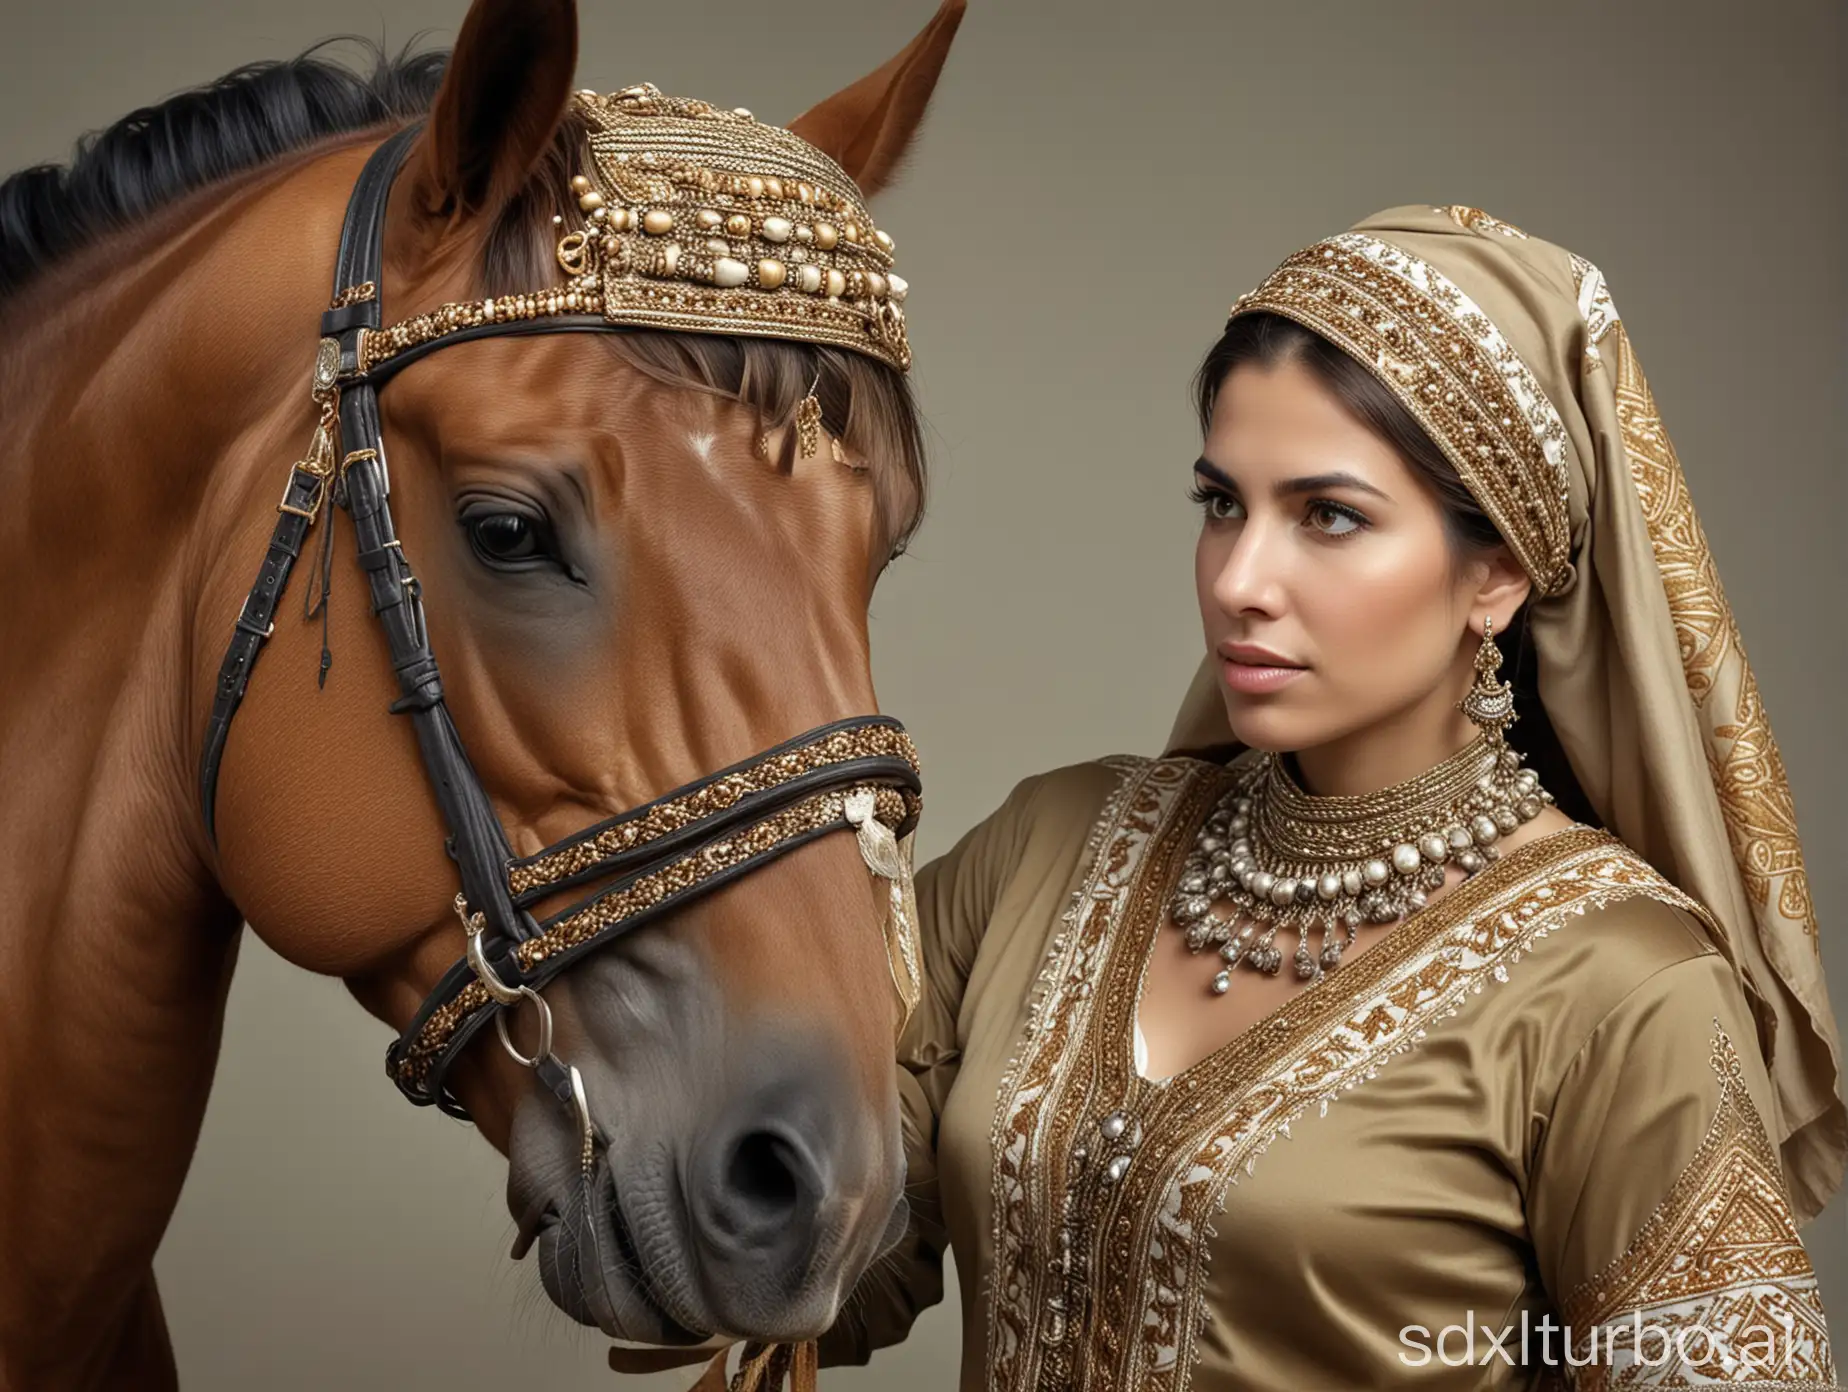 Hyper-realistic photo of a beautiful Greek woman wearing traditional Javanese kemben and khaki. Loving a horse. The photo is very bright and looks very realistic. Shoot with a Nikon camera, close up.